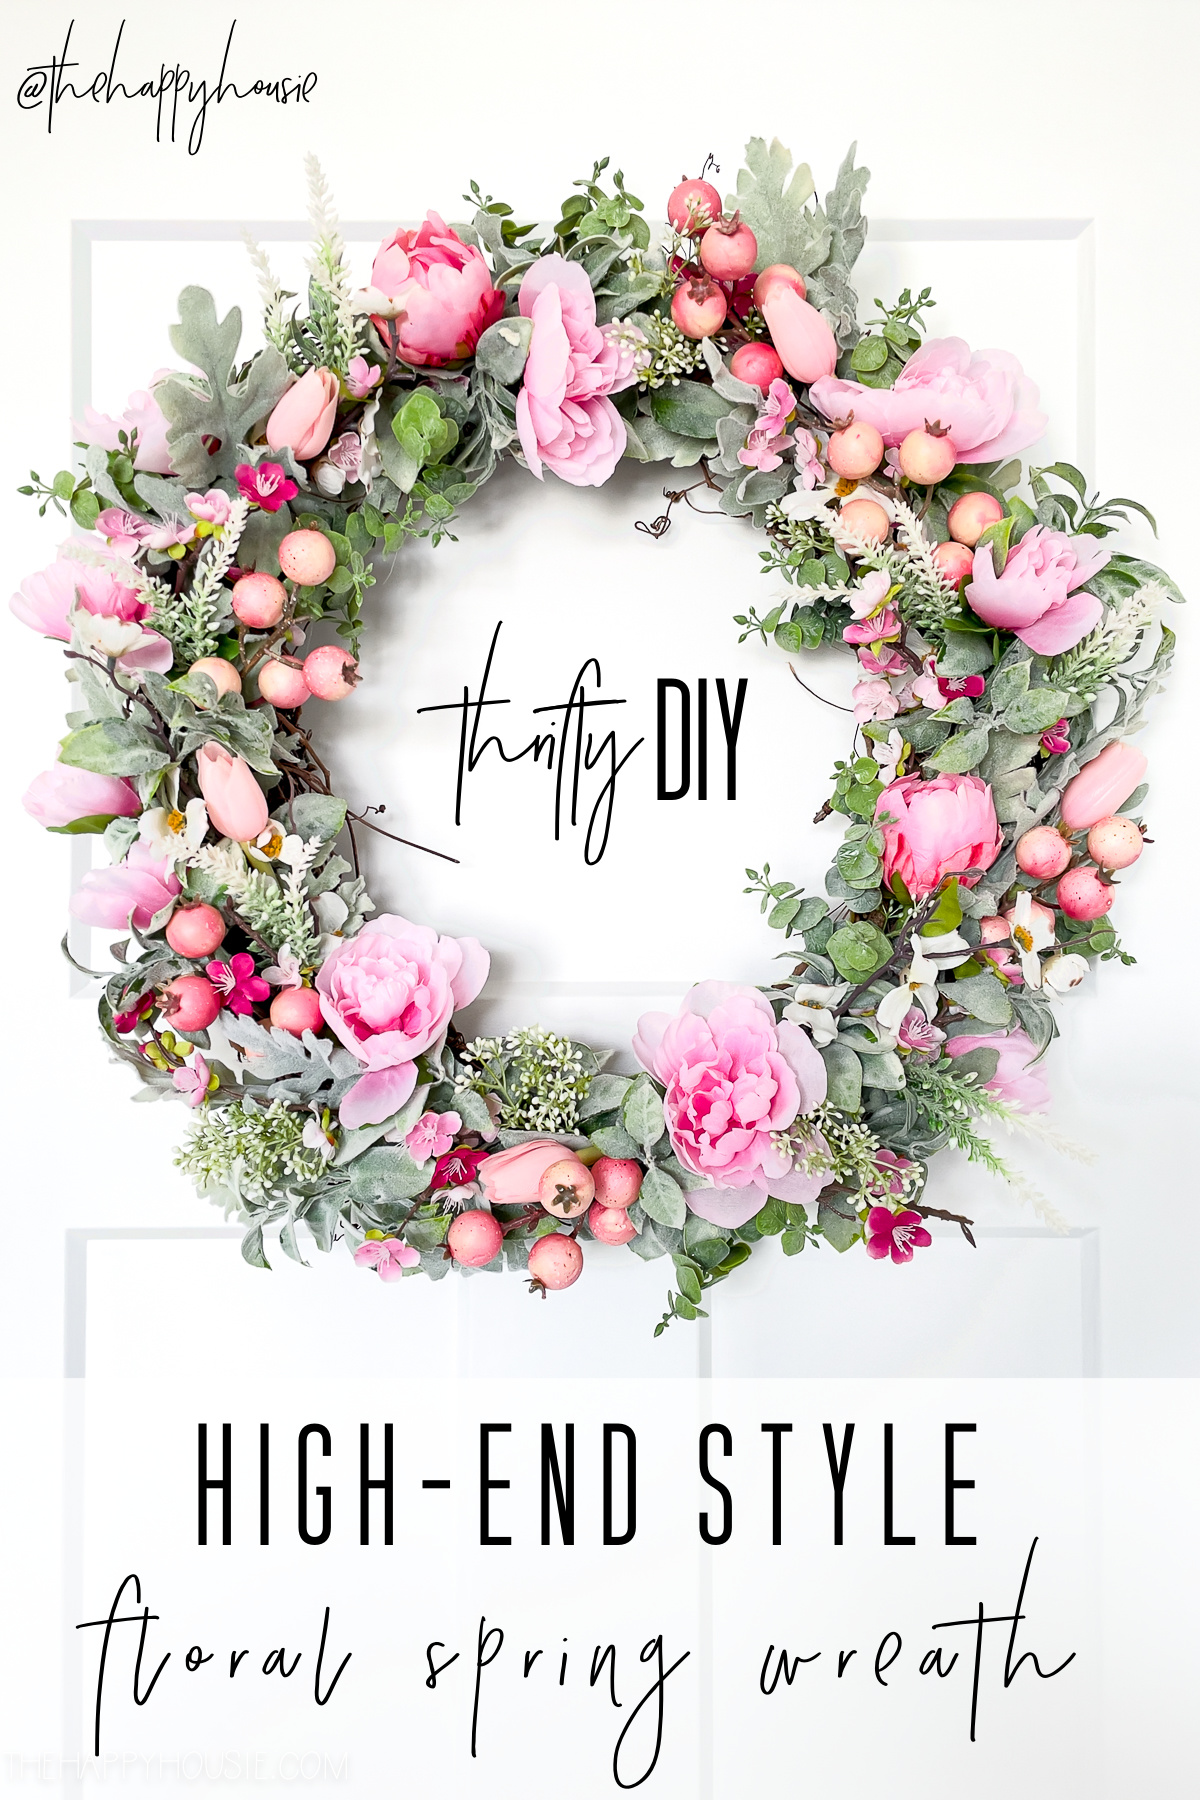 labeled image of a thrifty DIY high-end style floral spring wreath hanging on a door